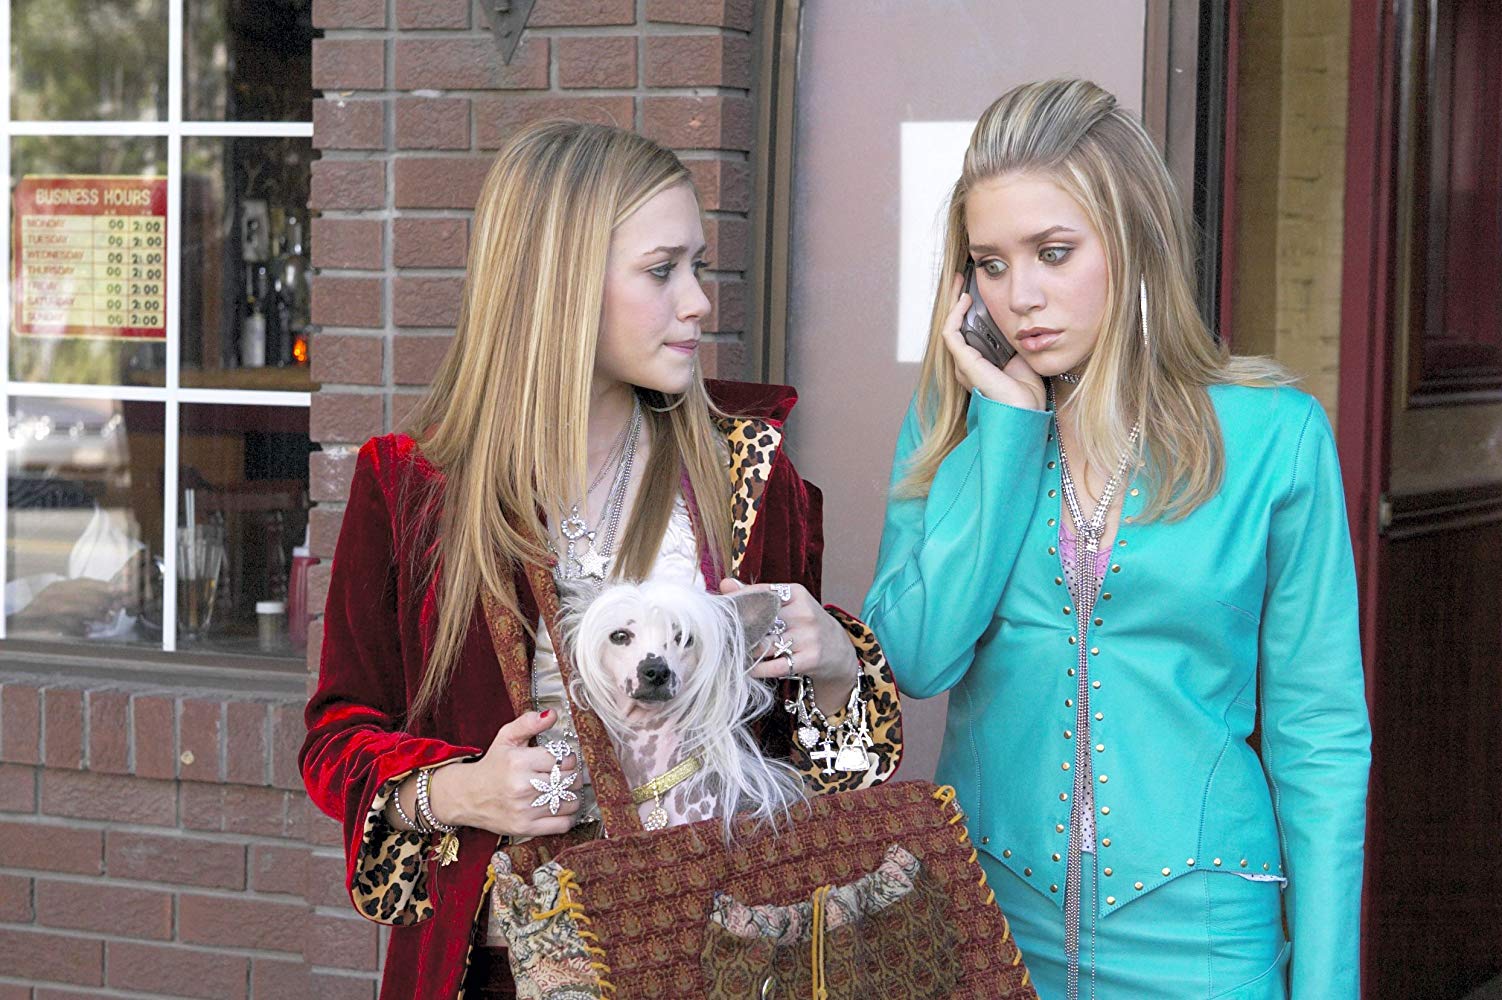 The fashion evolution of Mary-Kate and Ashley Olsen.